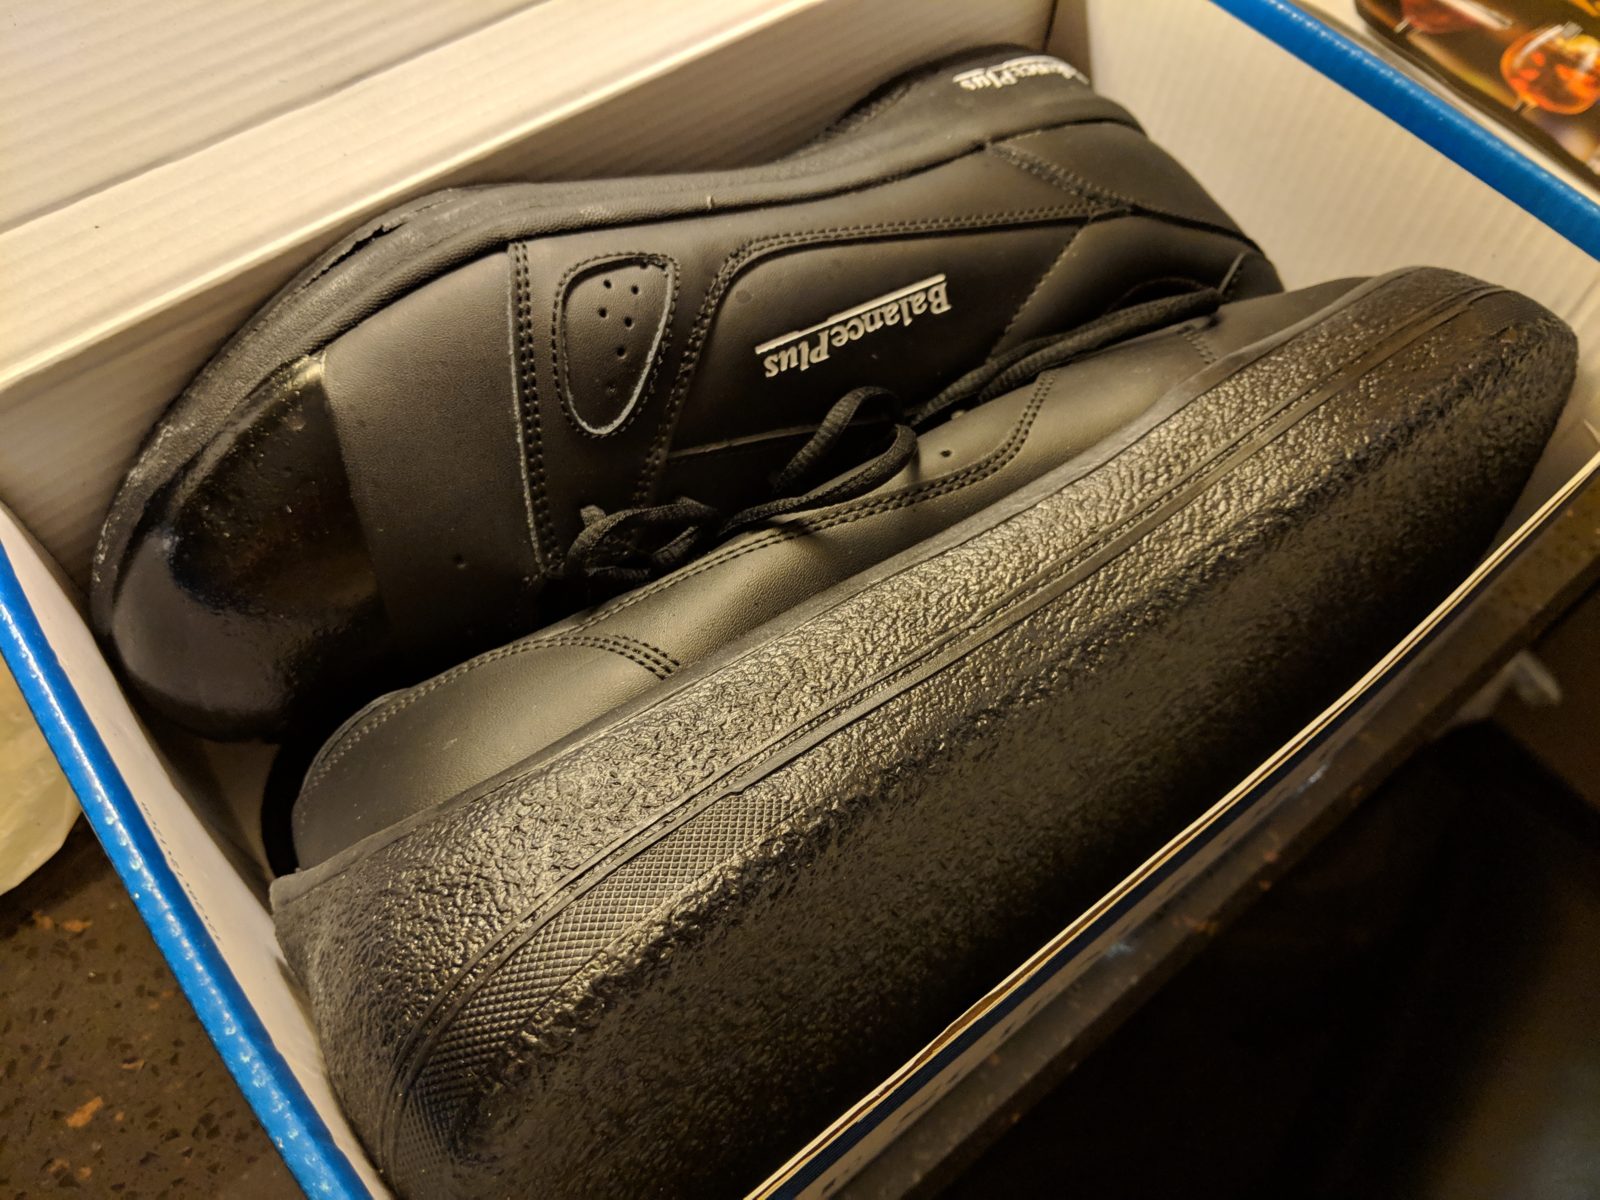 A pair of curling shoes purchased from Brooms Up Curling Supplies at the 2019 Continental Cup in Las Vegas, Nevada.